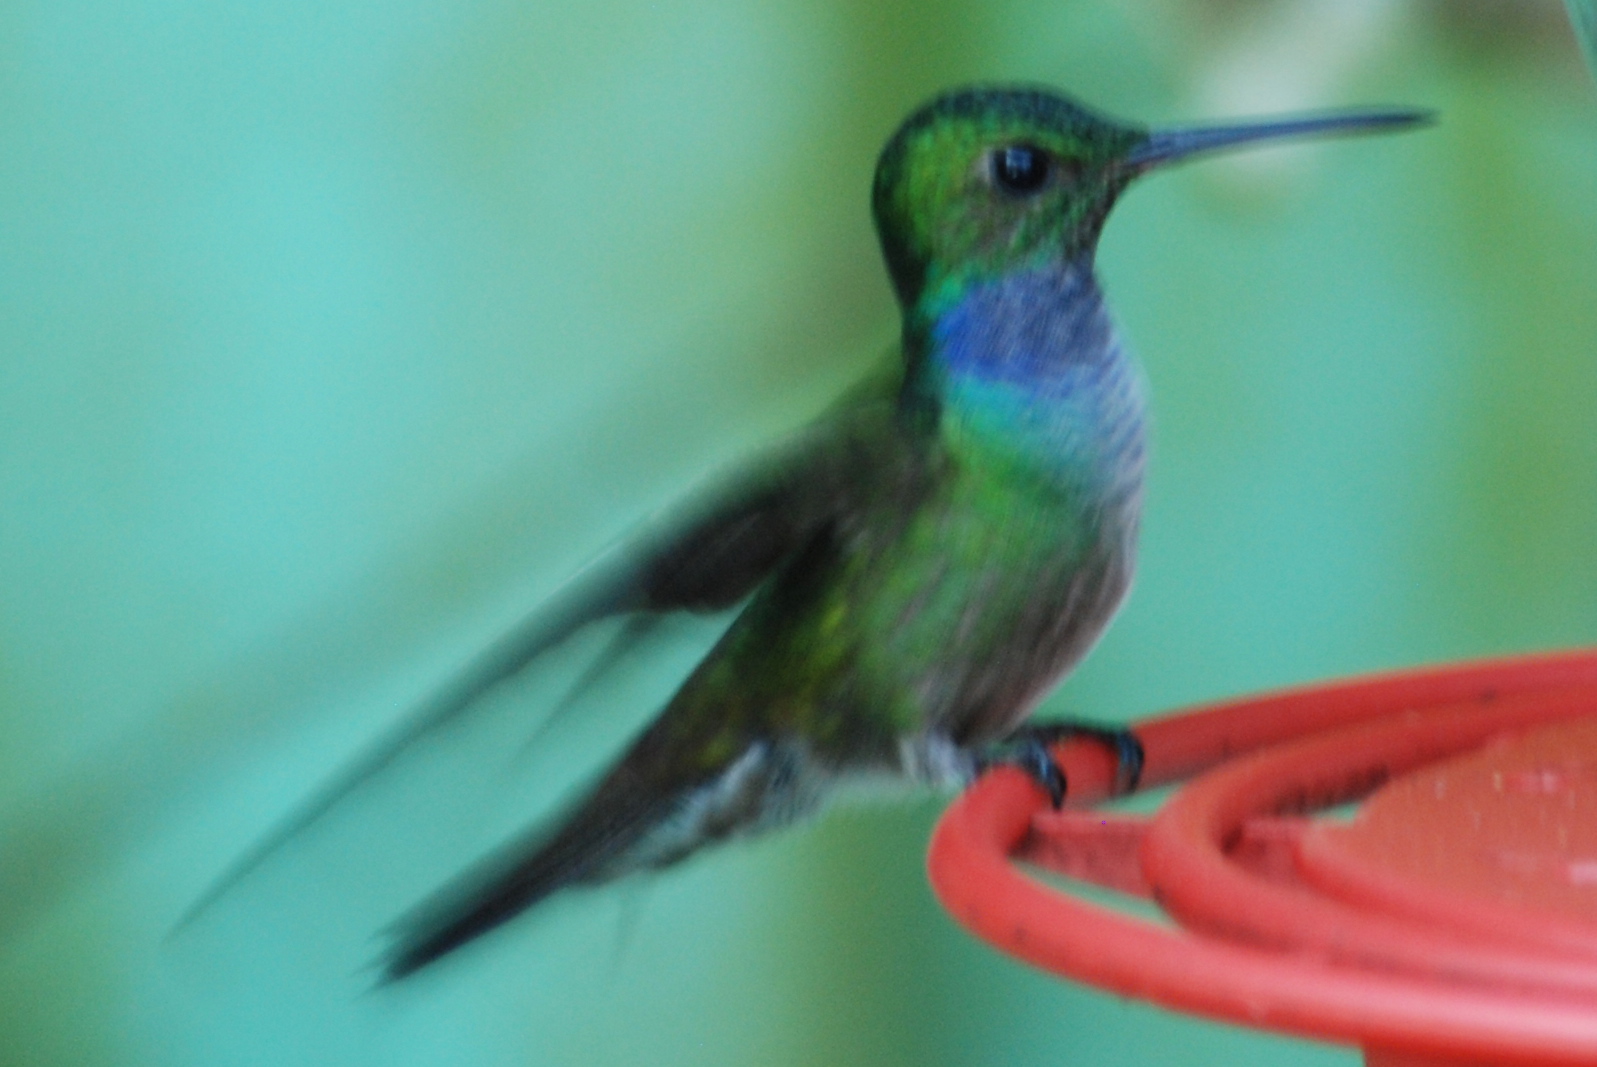 Click picture to see more Blue-chested Hummingbirds.